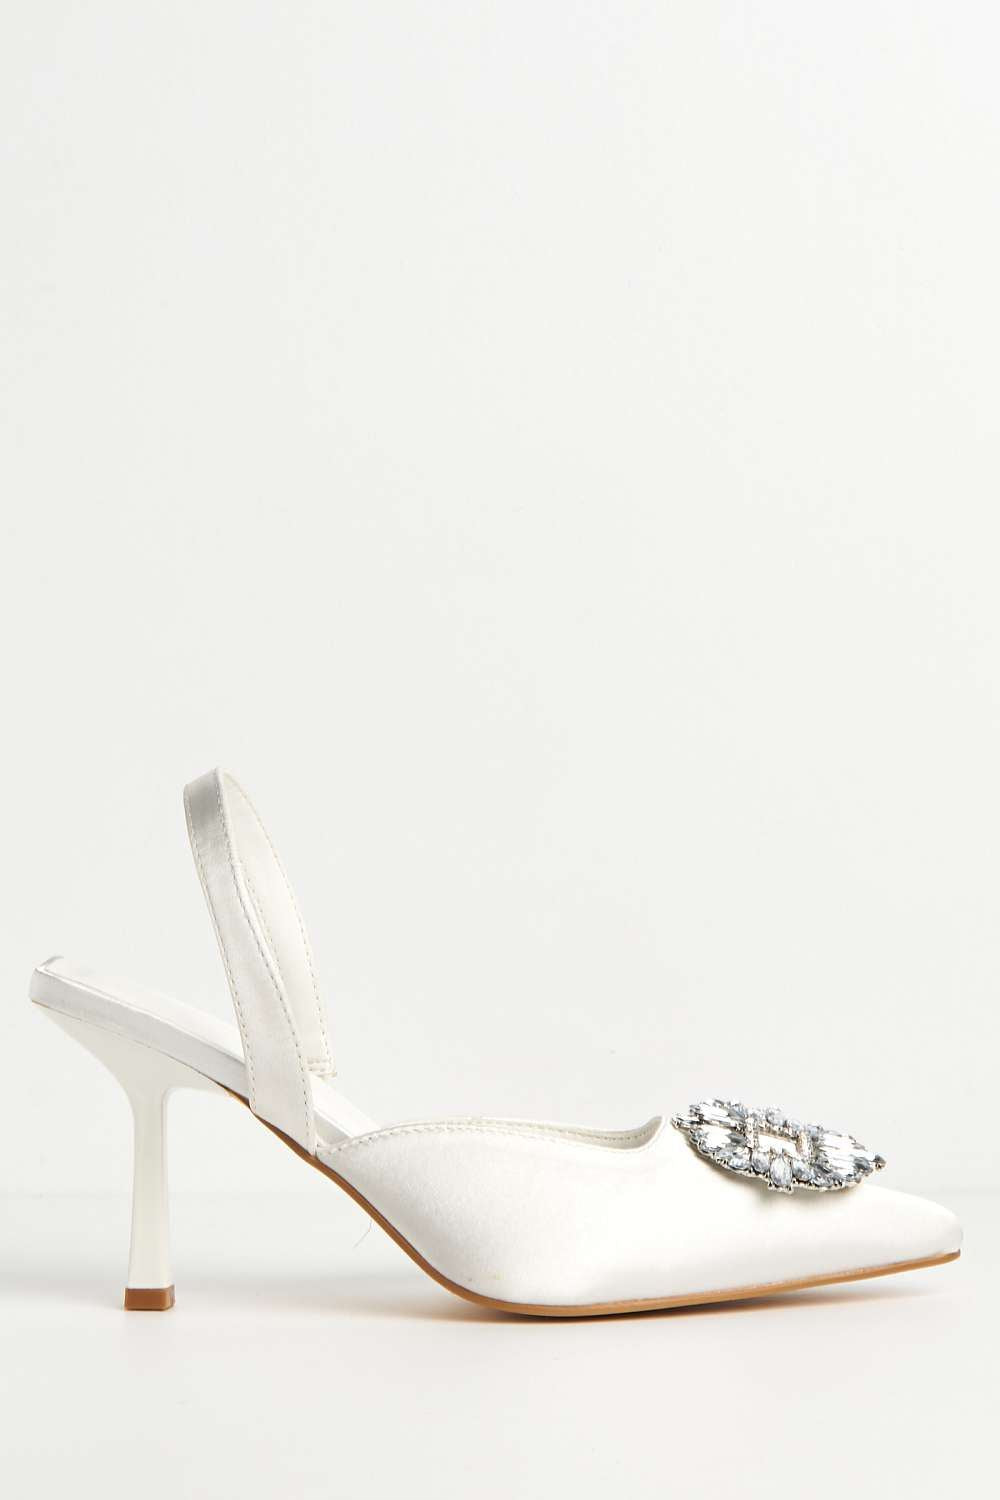 Miss Diva Amira Diamante Brooch Sling Back Court Shoes in Ivory Satin